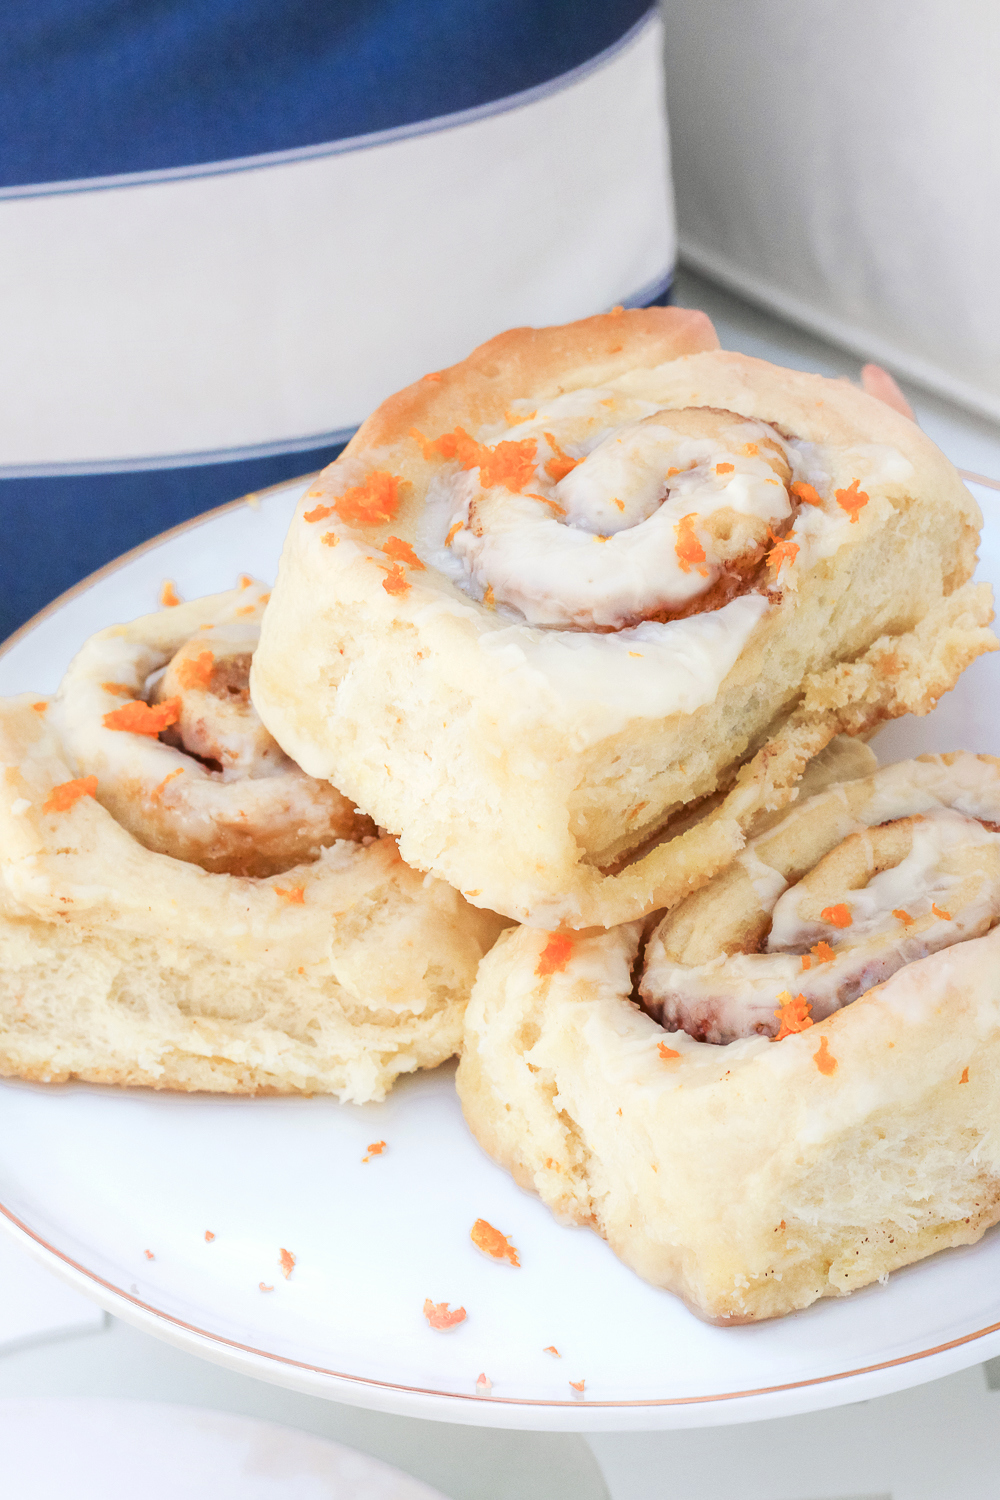 Sweetest Holiday Tradition: Homemade Orange Rolls Recipe by southern lifestyle blogger Stephanie Ziajka from Diary of a Debutante, omeprazole orally disintegrating tablet, big fluffy homemade cinnamon rolls recipe, homemade cinnamon rolls from scratch, homemade jumbo cinnamon rolls